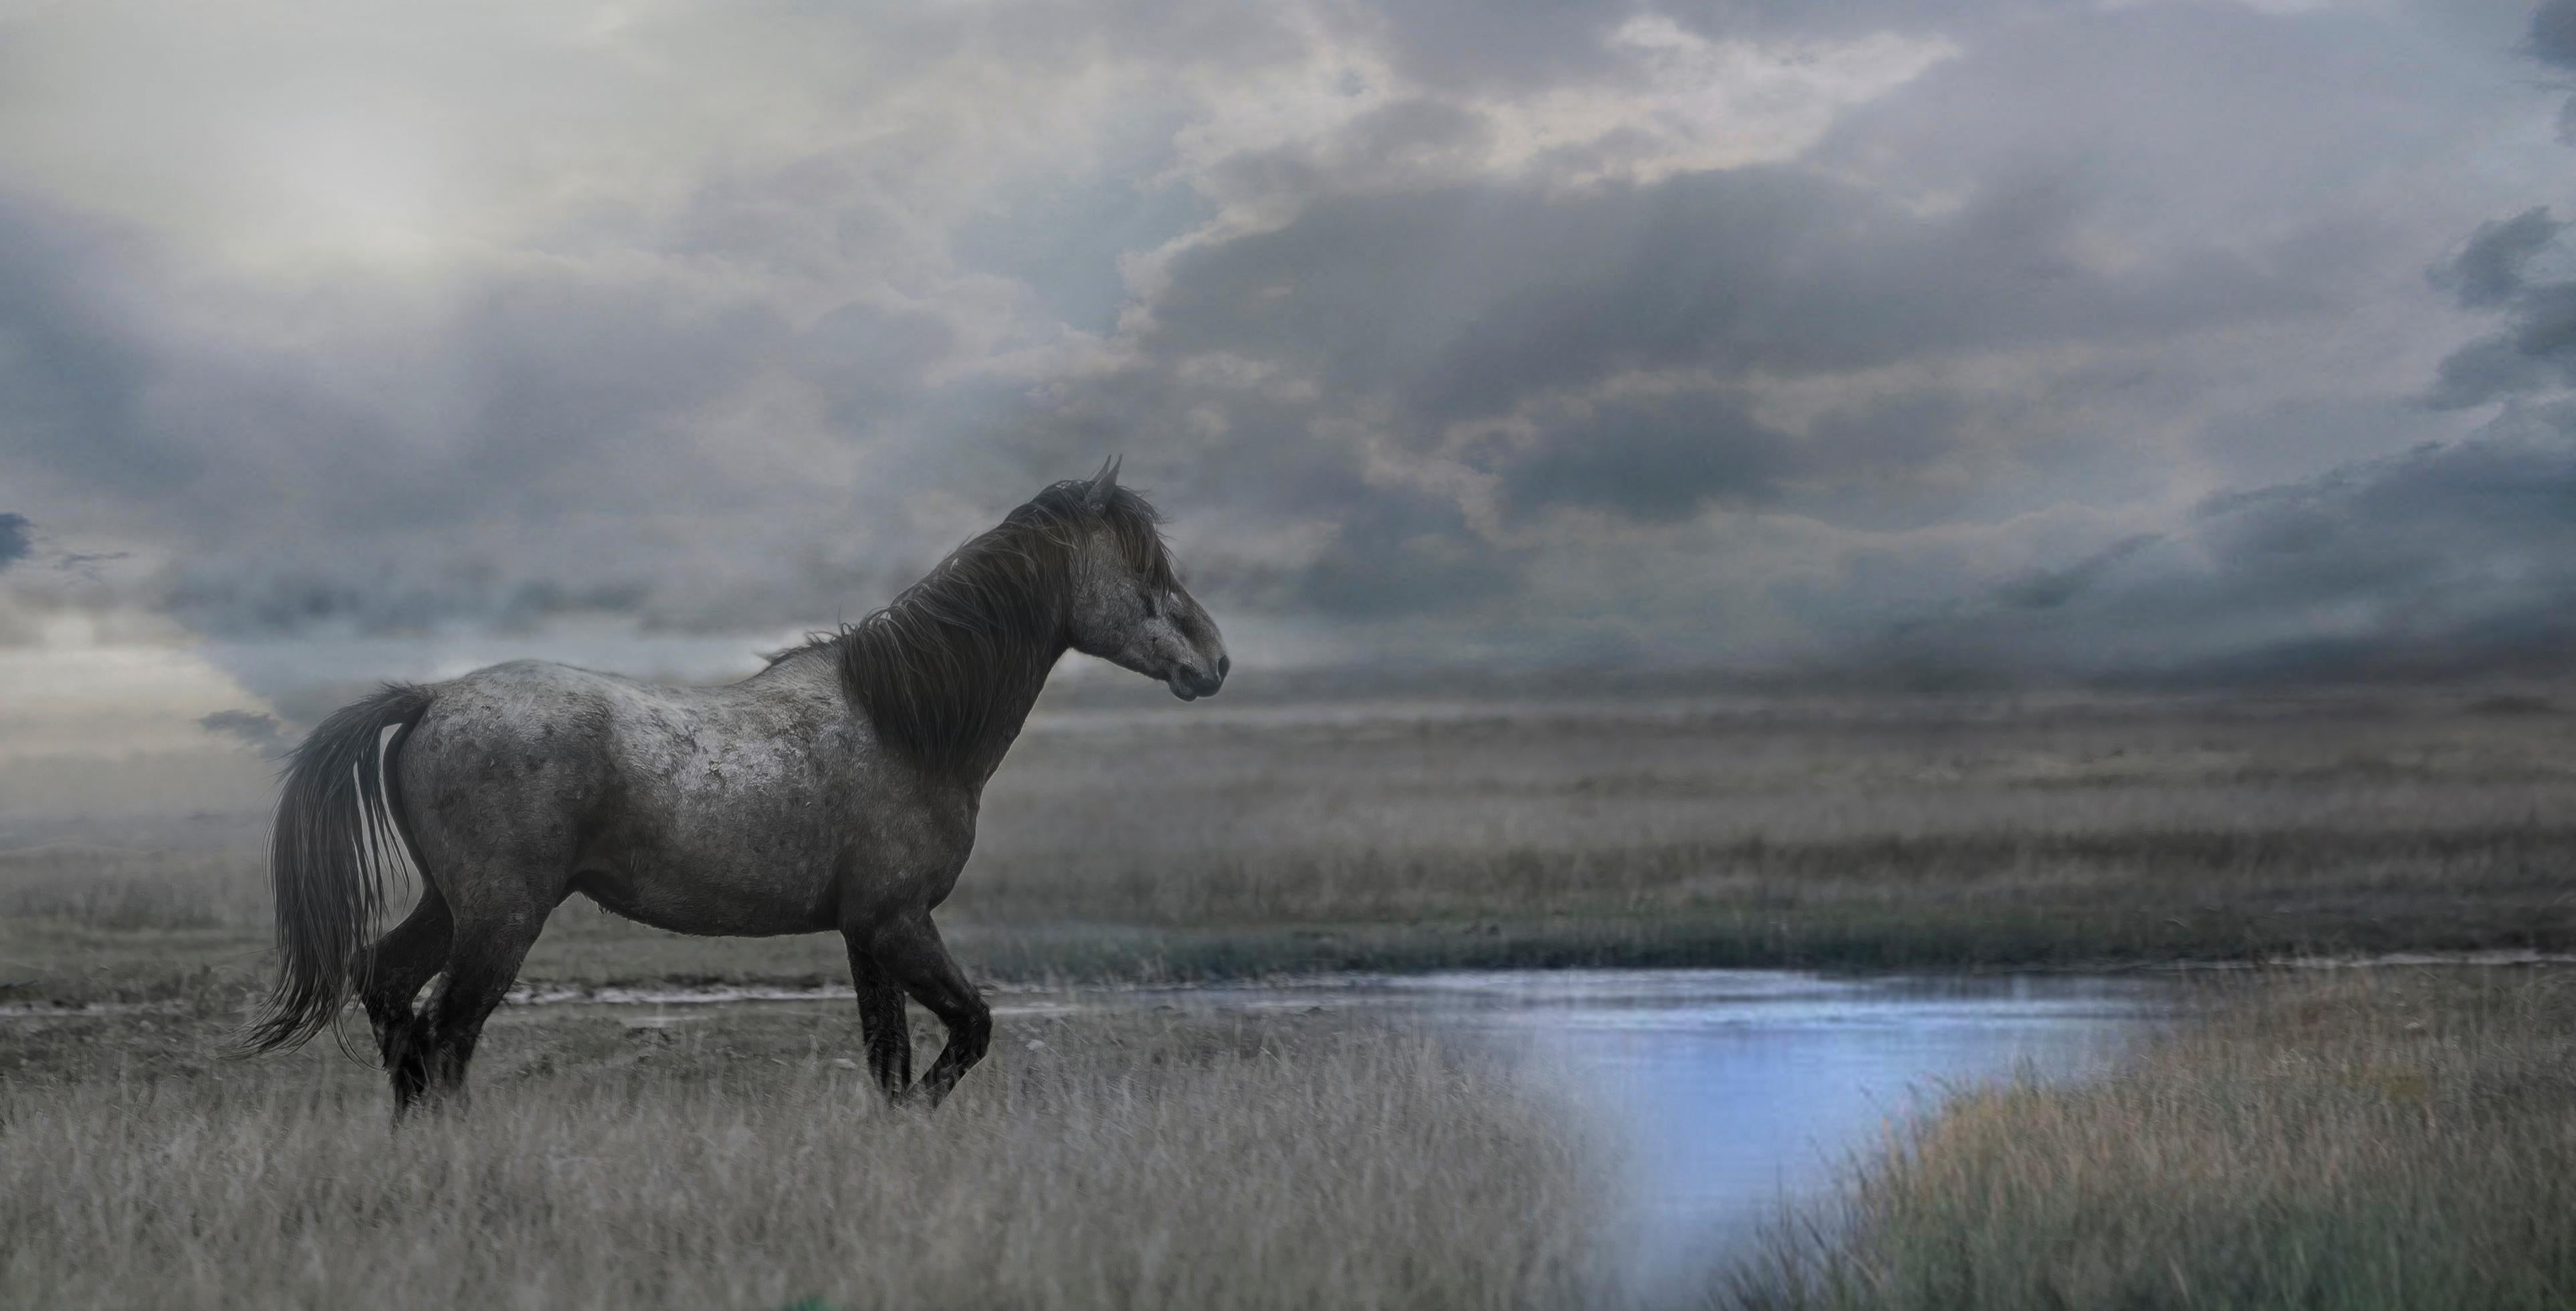 Shane Russeck Landscape Photograph - Once Upon a Time in the West - 10 x 20  Photography of Wild Horses - Photograph